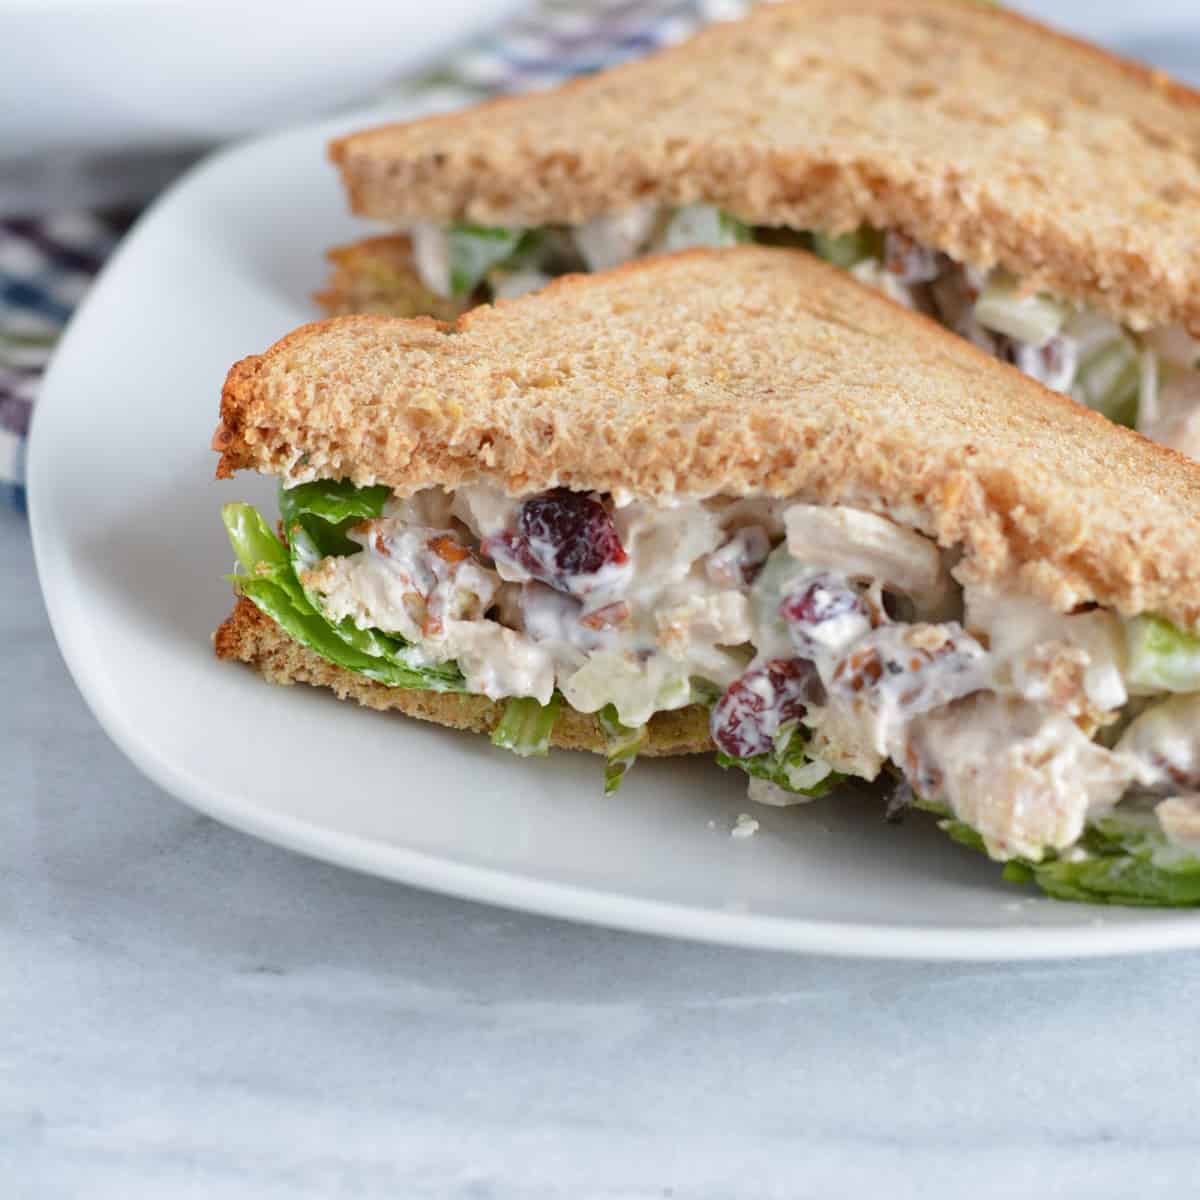 Chicken salad on whole wheat bread on a white plate.